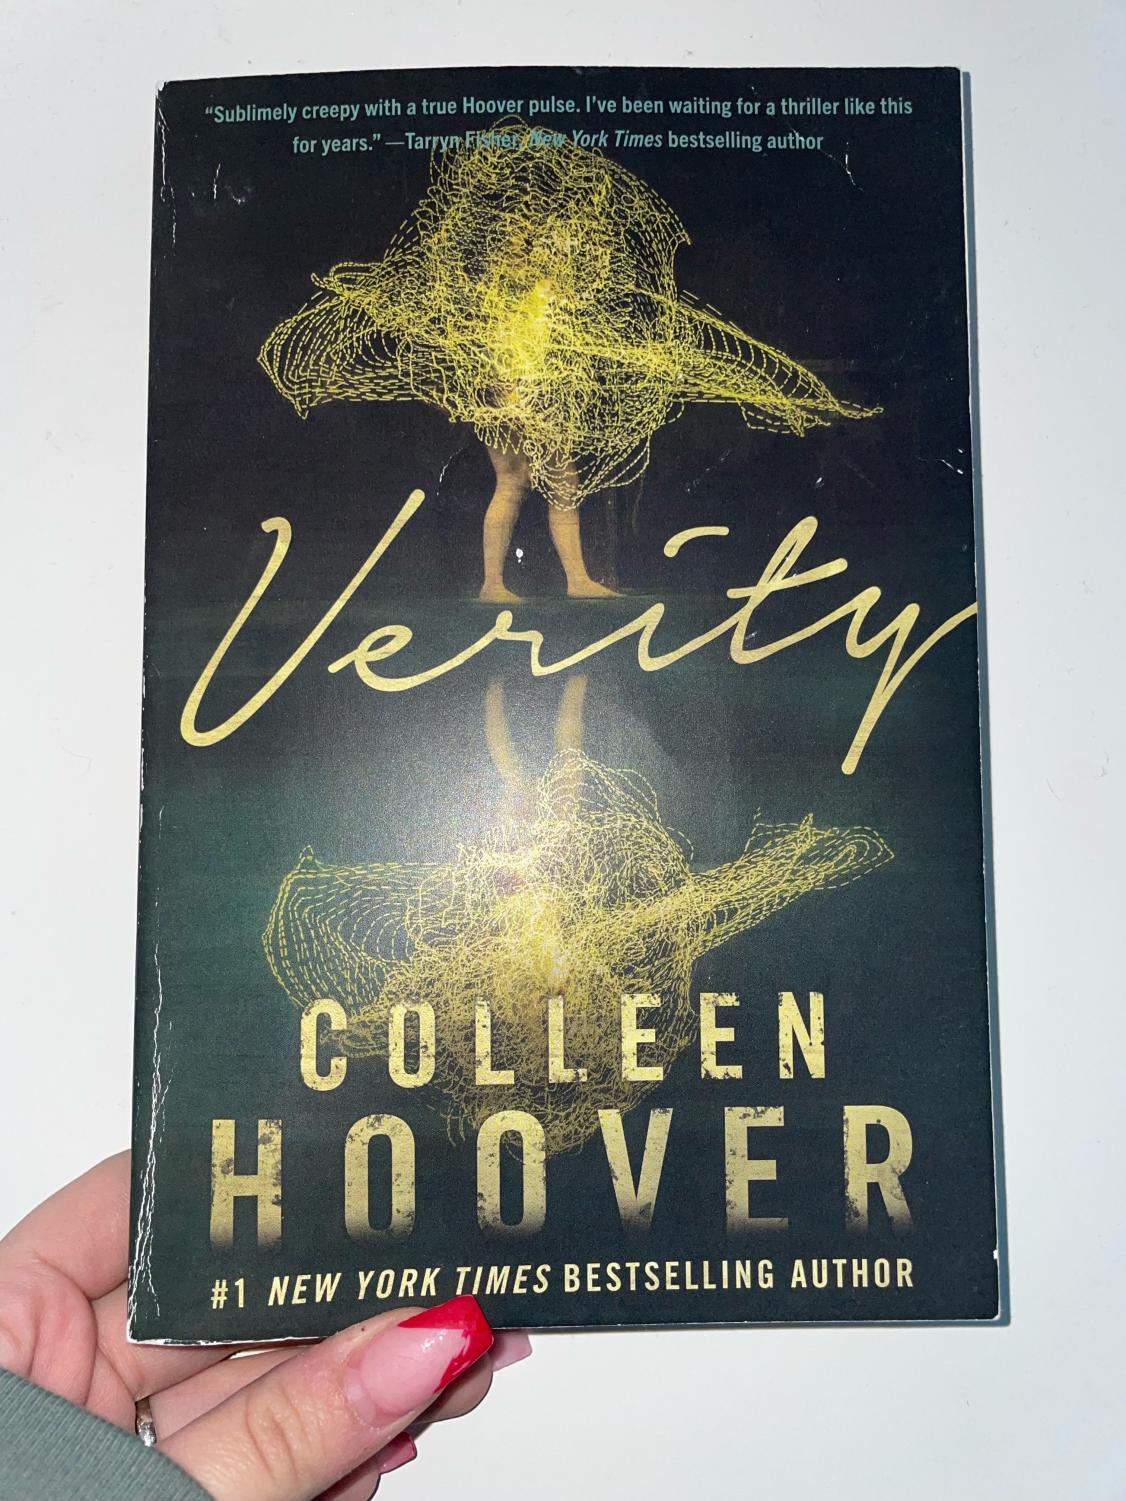 Book Review: Verity by Colleen Hoover – Ended Up Reading